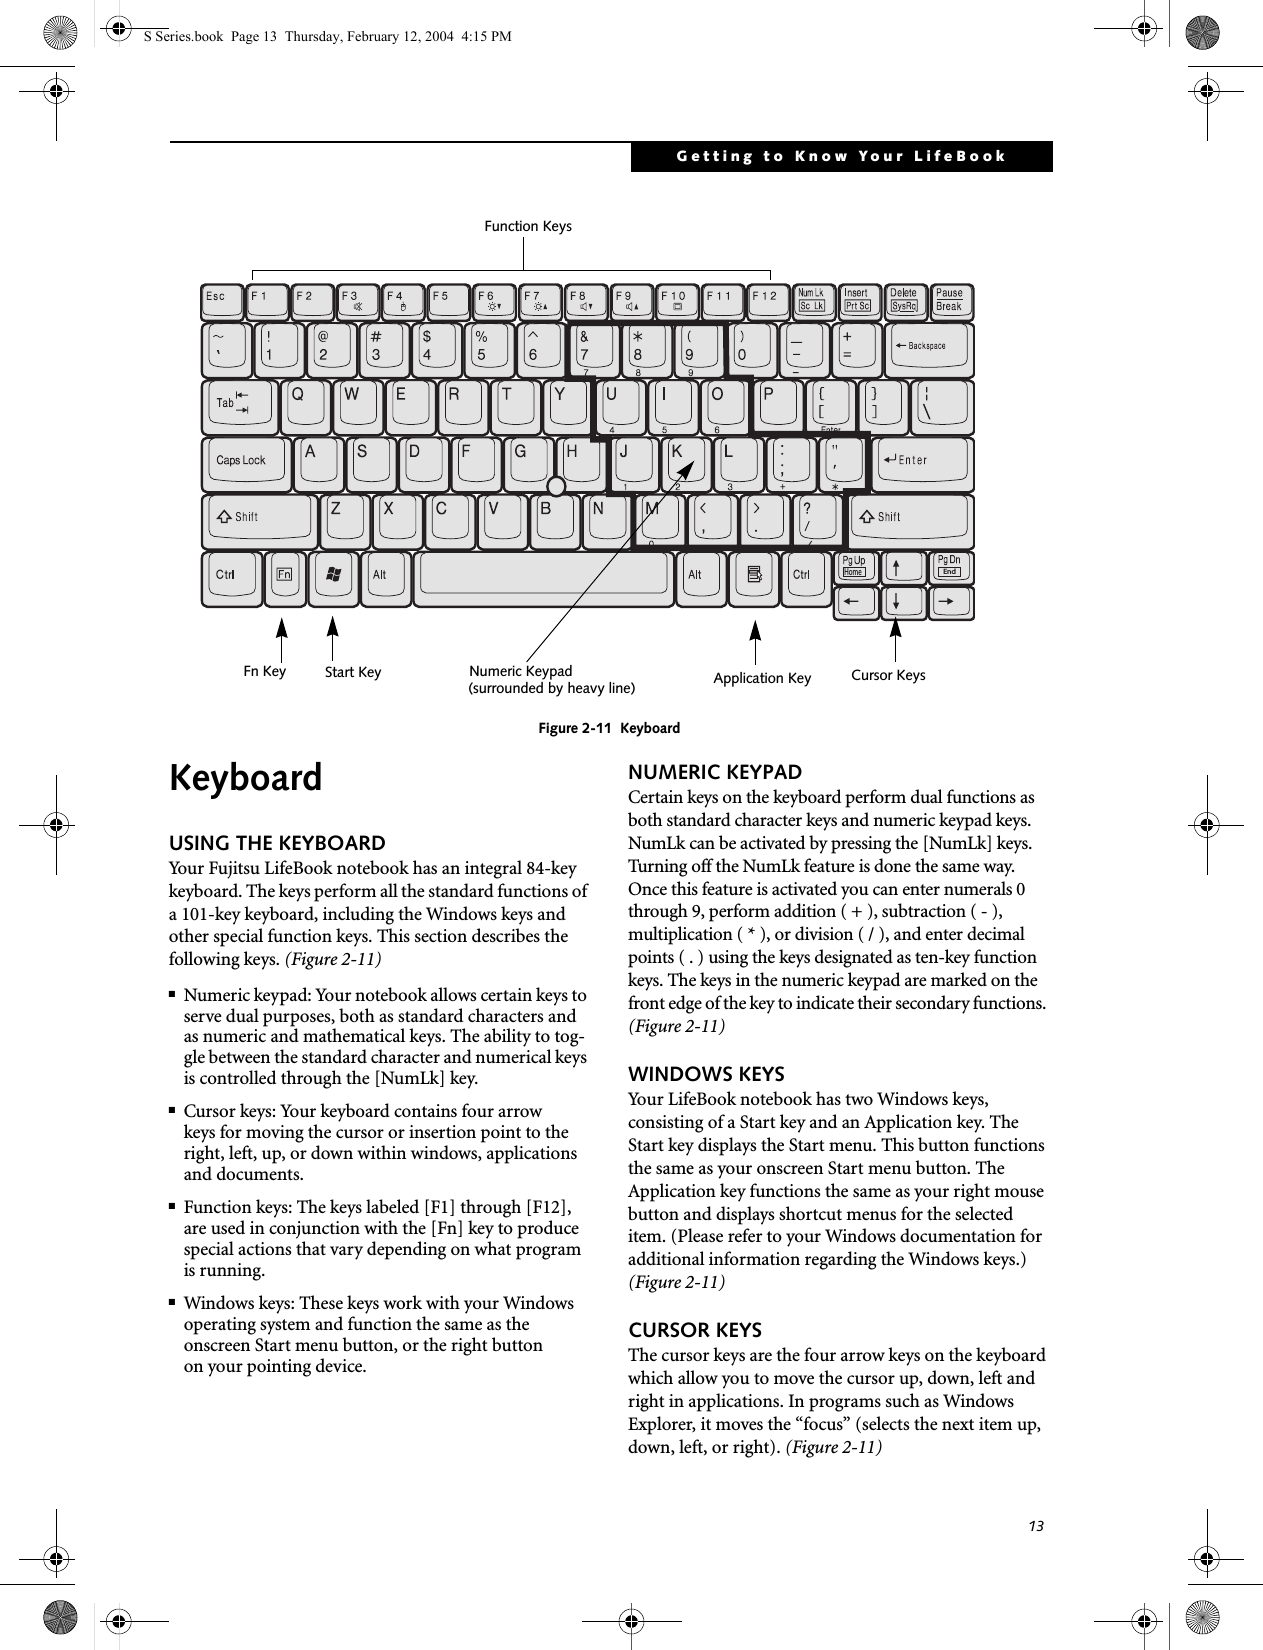 13Getting to Know Your LifeBookFigure 2-11  KeyboardKeyboard USING THE KEYBOARDYour Fujitsu LifeBook notebook has an integral 84-key keyboard. The keys perform all the standard functions of a 101-key keyboard, including the Windows keys and other special function keys. This section describes the following keys. (Figure 2-11)■Numeric keypad: Your notebook allows certain keys to serve dual purposes, both as standard characters and as numeric and mathematical keys. The ability to tog-gle between the standard character and numerical keys is controlled through the [NumLk] key.■Cursor keys: Your keyboard contains four arrowkeys for moving the cursor or insertion point to the right, left, up, or down within windows, applications and documents. ■Function keys: The keys labeled [F1] through [F12], are used in conjunction with the [Fn] key to produce special actions that vary depending on what program is running. ■Windows keys: These keys work with your Windows operating system and function the same as the onscreen Start menu button, or the right buttonon your pointing device.NUMERIC KEYPADCertain keys on the keyboard perform dual functions as both standard character keys and numeric keypad keys. NumLk can be activated by pressing the [NumLk] keys. Turning off the NumLk feature is done the same way. Once this feature is activated you can enter numerals 0 through 9, perform addition ( + ), subtraction ( - ),multiplication ( * ), or division ( / ), and enter decimal points ( . ) using the keys designated as ten-key function keys. The keys in the numeric keypad are marked on the front edge of the key to indicate their secondary functions. (Figure 2-11) WINDOWS KEYSYour LifeBook notebook has two Windows keys, consisting of a Start key and an Application key. The Start key displays the Start menu. This button functions the same as your onscreen Start menu button. The Application key functions the same as your right mouse button and displays shortcut menus for the selected item. (Please refer to your Windows documentation for additional information regarding the Windows keys.) (Figure 2-11)CURSOR KEYSThe cursor keys are the four arrow keys on the keyboard which allow you to move the cursor up, down, left and right in applications. In programs such as Windows Explorer, it moves the “focus” (selects the next item up, down, left, or right). (Figure 2-11)EndHomeFn Key Start KeyFunction KeysNumeric Keypad Application Key Cursor Keys(surrounded by heavy line) S Series.book  Page 13  Thursday, February 12, 2004  4:15 PM